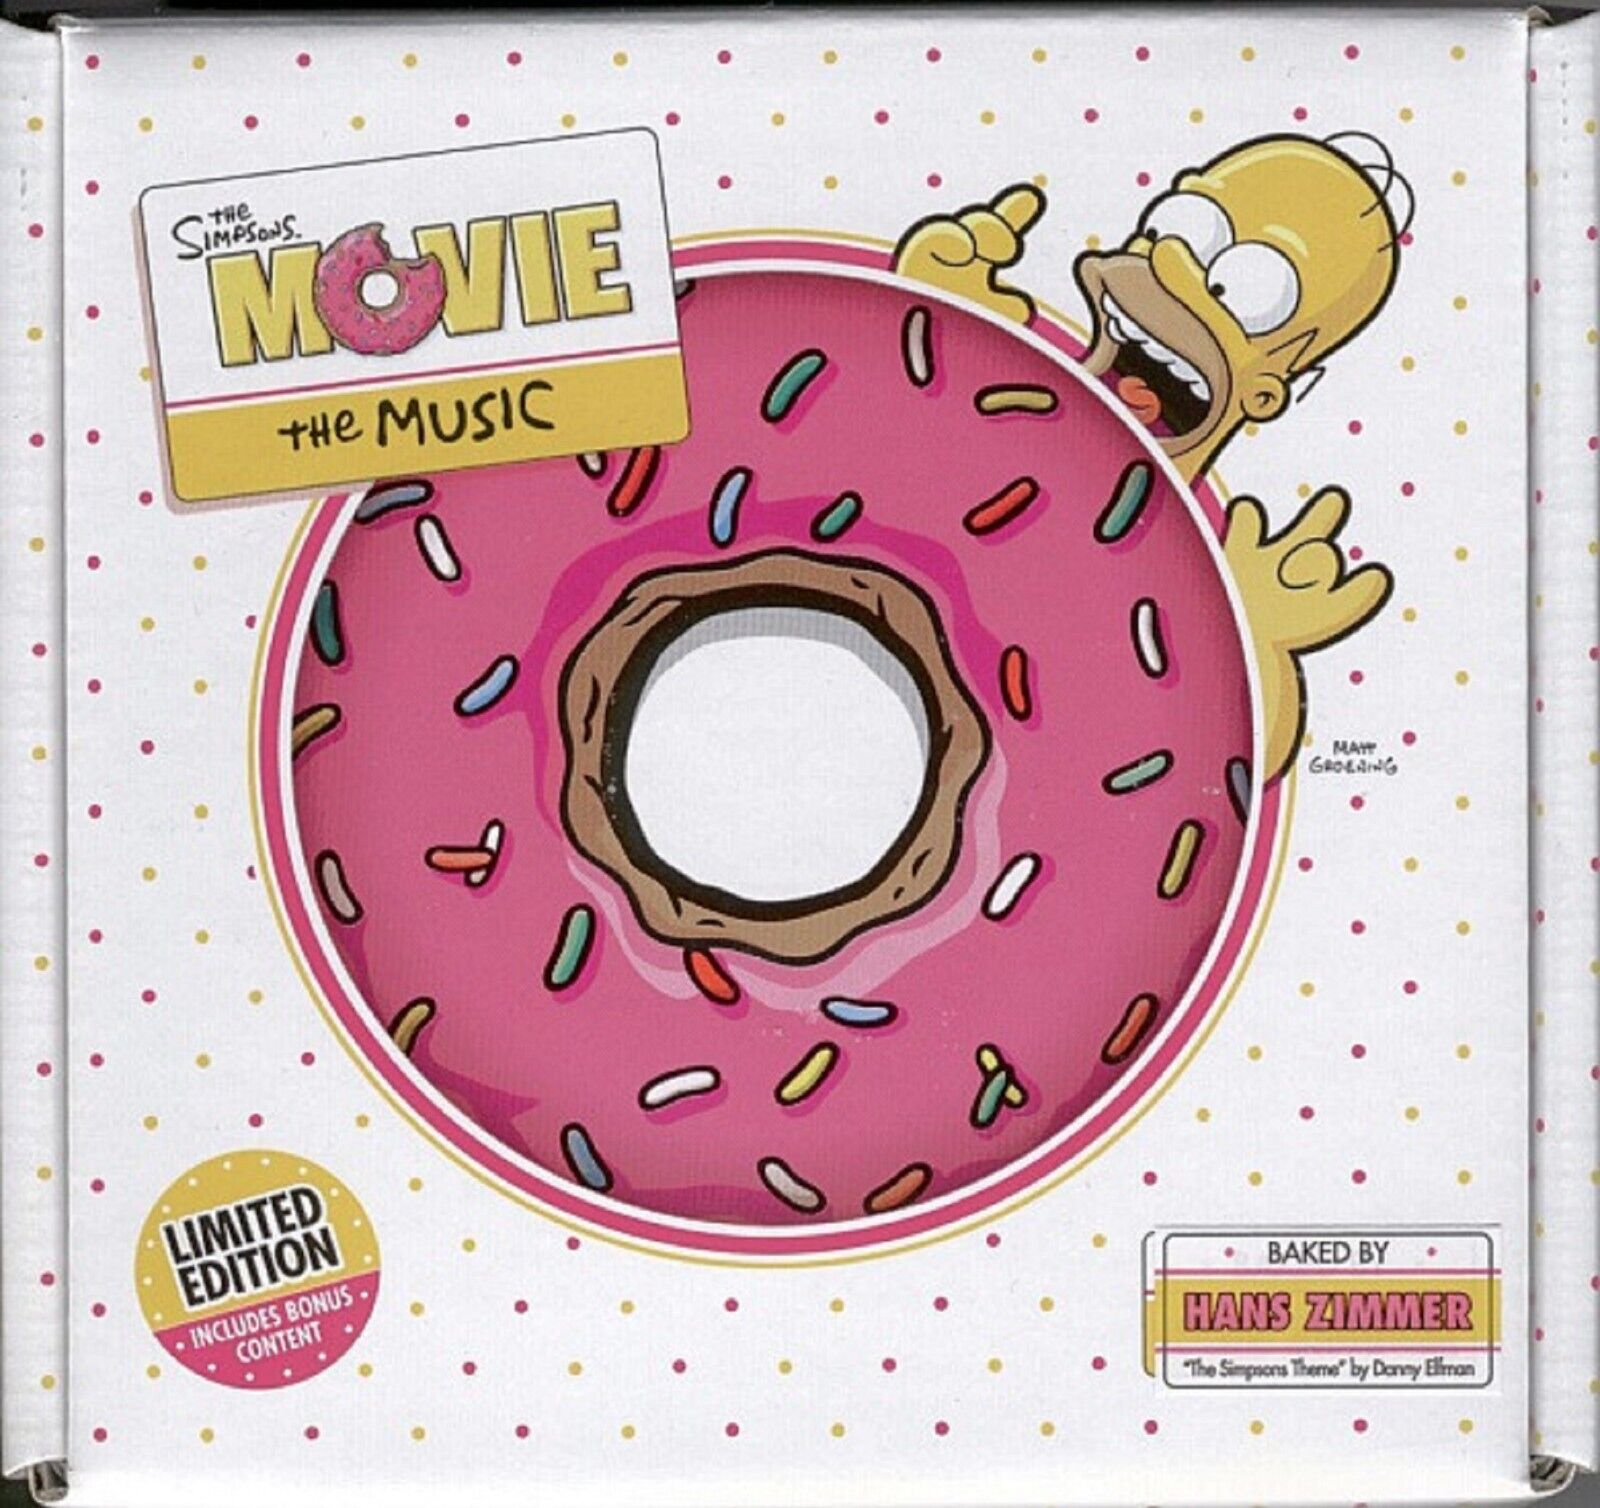 The Simpsons Movie: The Music [Original Soundtrack] [Limited Edition], New